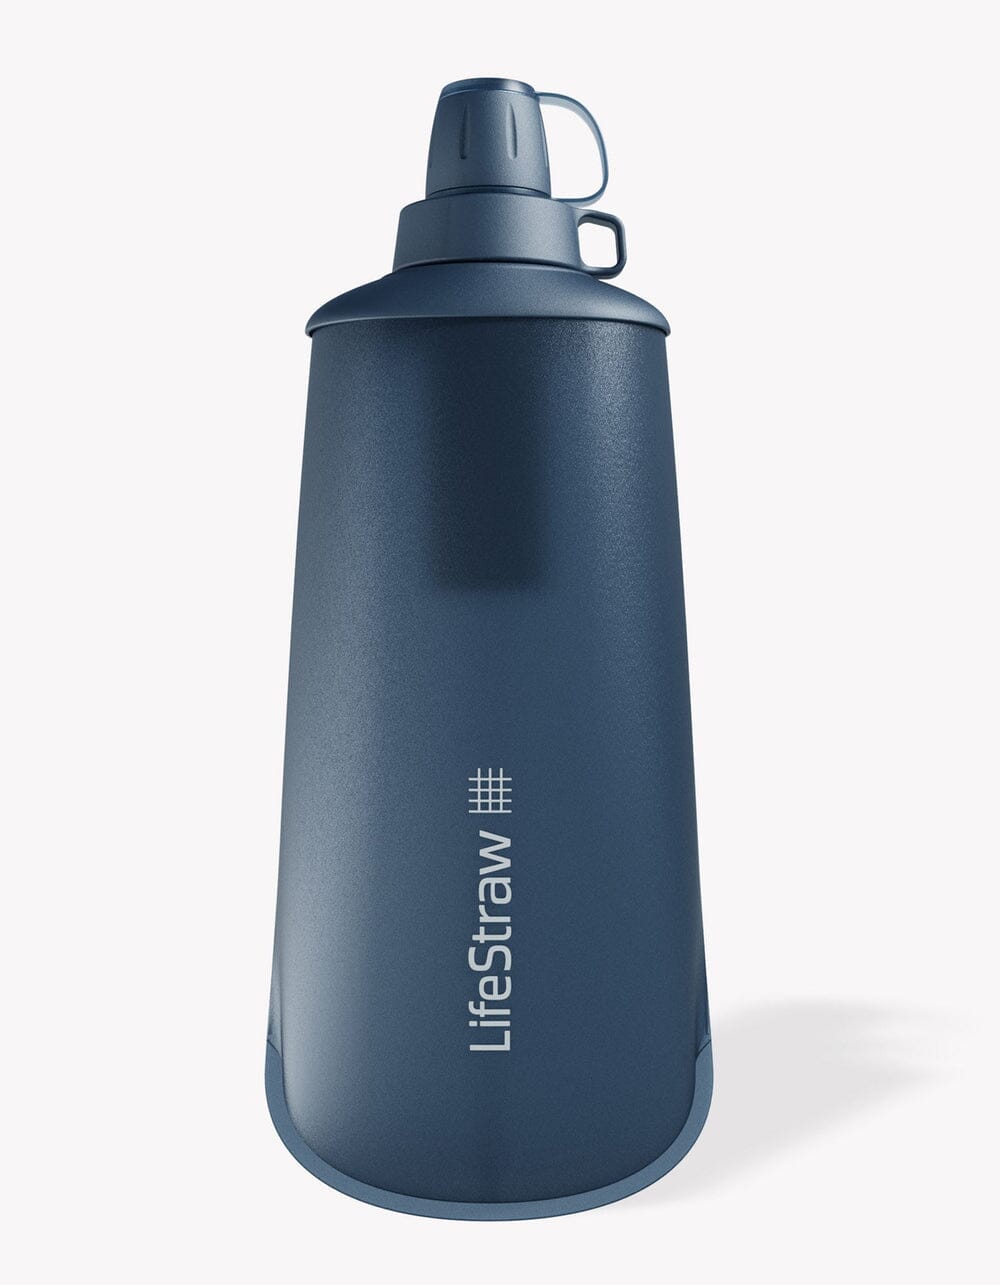 LifeStraw Peak Series Collapsible Squeeze Bottle With Filter Mountain Blue 1 L 